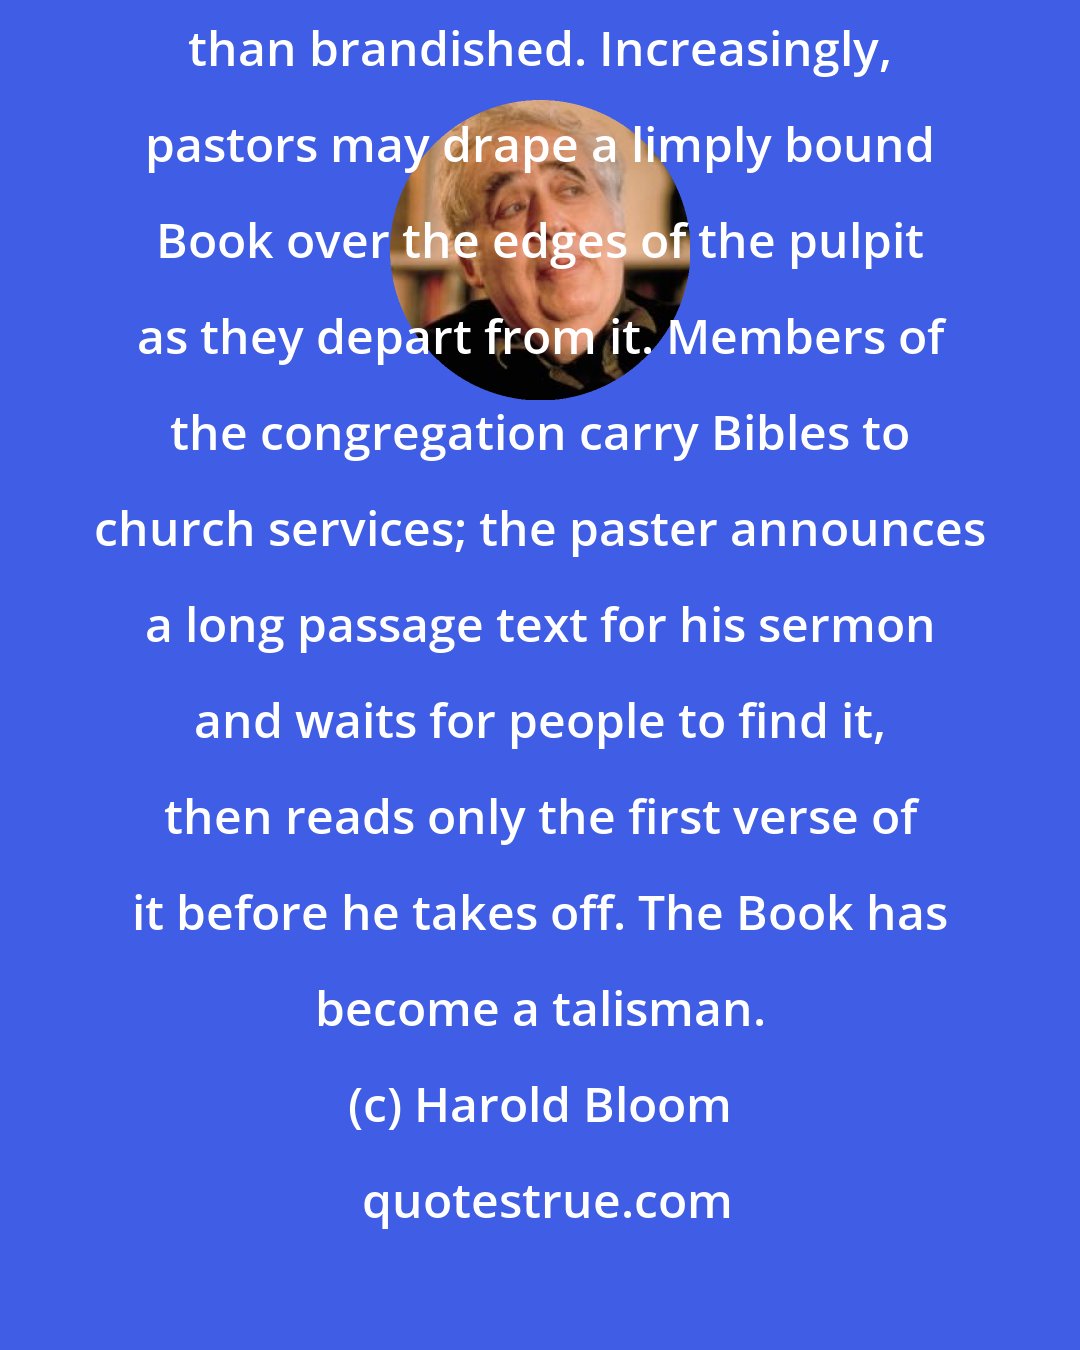 Harold Bloom: ...the Bible itself is less read than preached, less interpreted than brandished. Increasingly, pastors may drape a limply bound Book over the edges of the pulpit as they depart from it. Members of the congregation carry Bibles to church services; the paster announces a long passage text for his sermon and waits for people to find it, then reads only the first verse of it before he takes off. The Book has become a talisman.